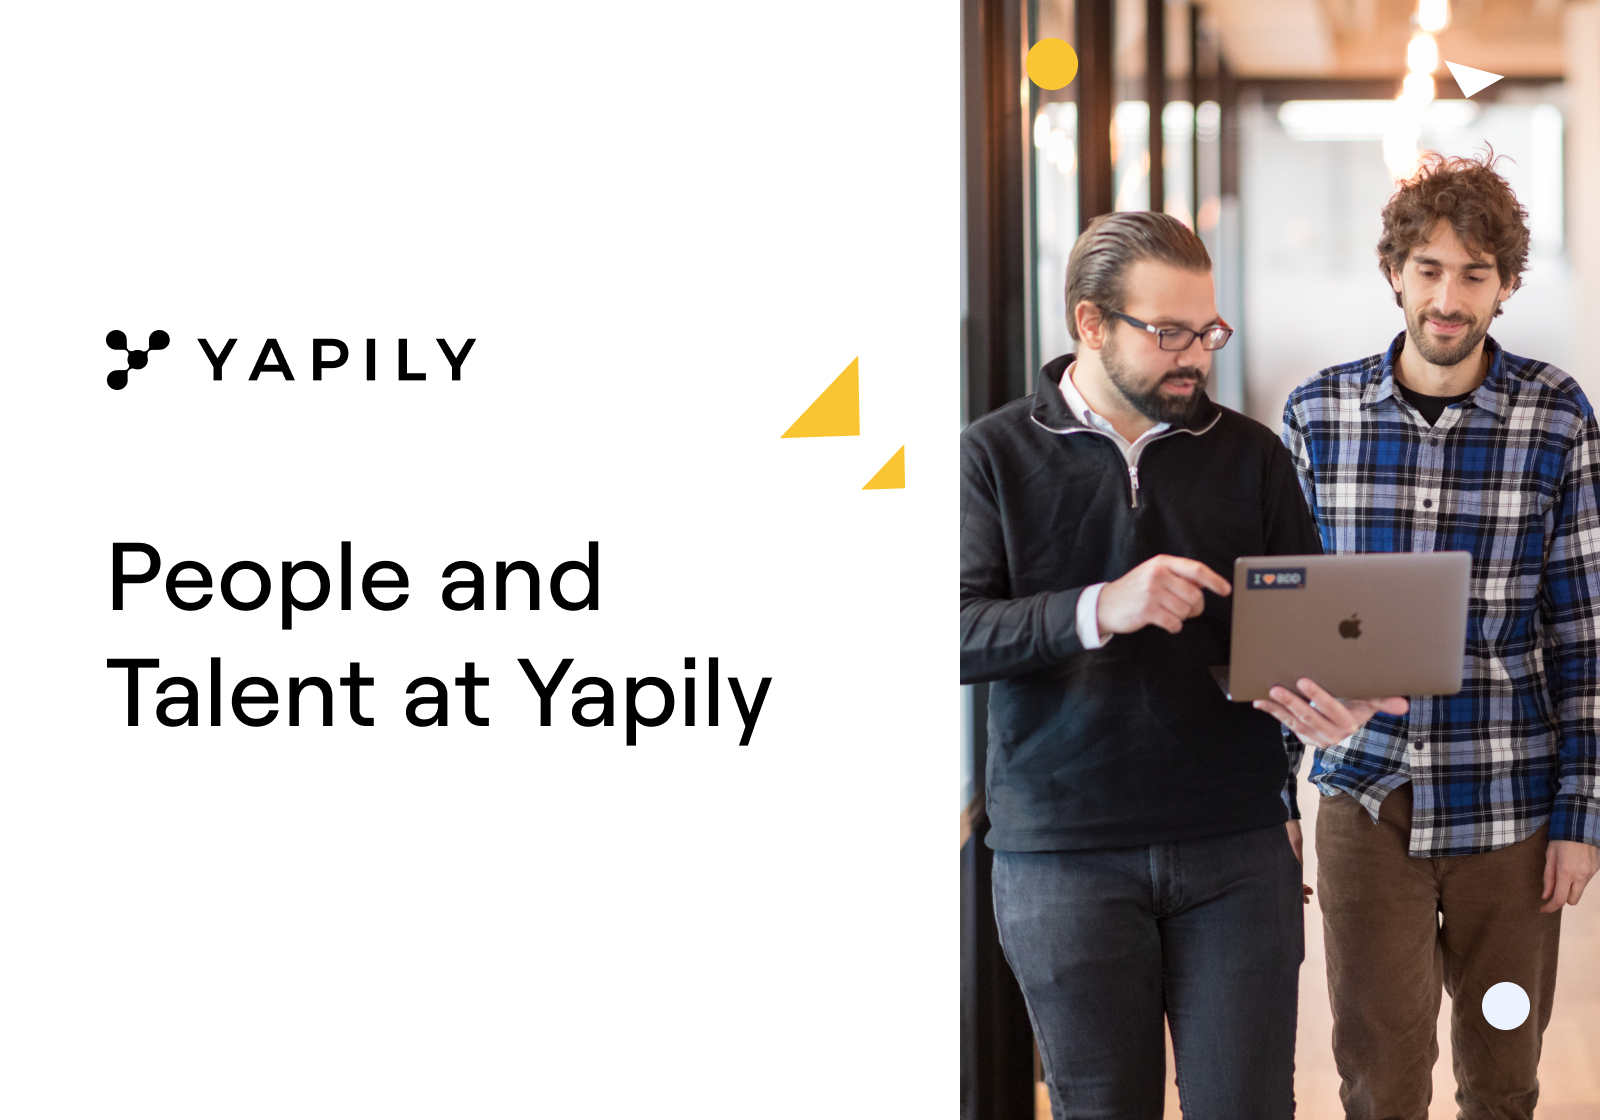 The People Team is responsible for the experience that people have when they work at Yapily. We want our team to have their careers and their lives positively impacted through working with us. It’s a very ambitious target!